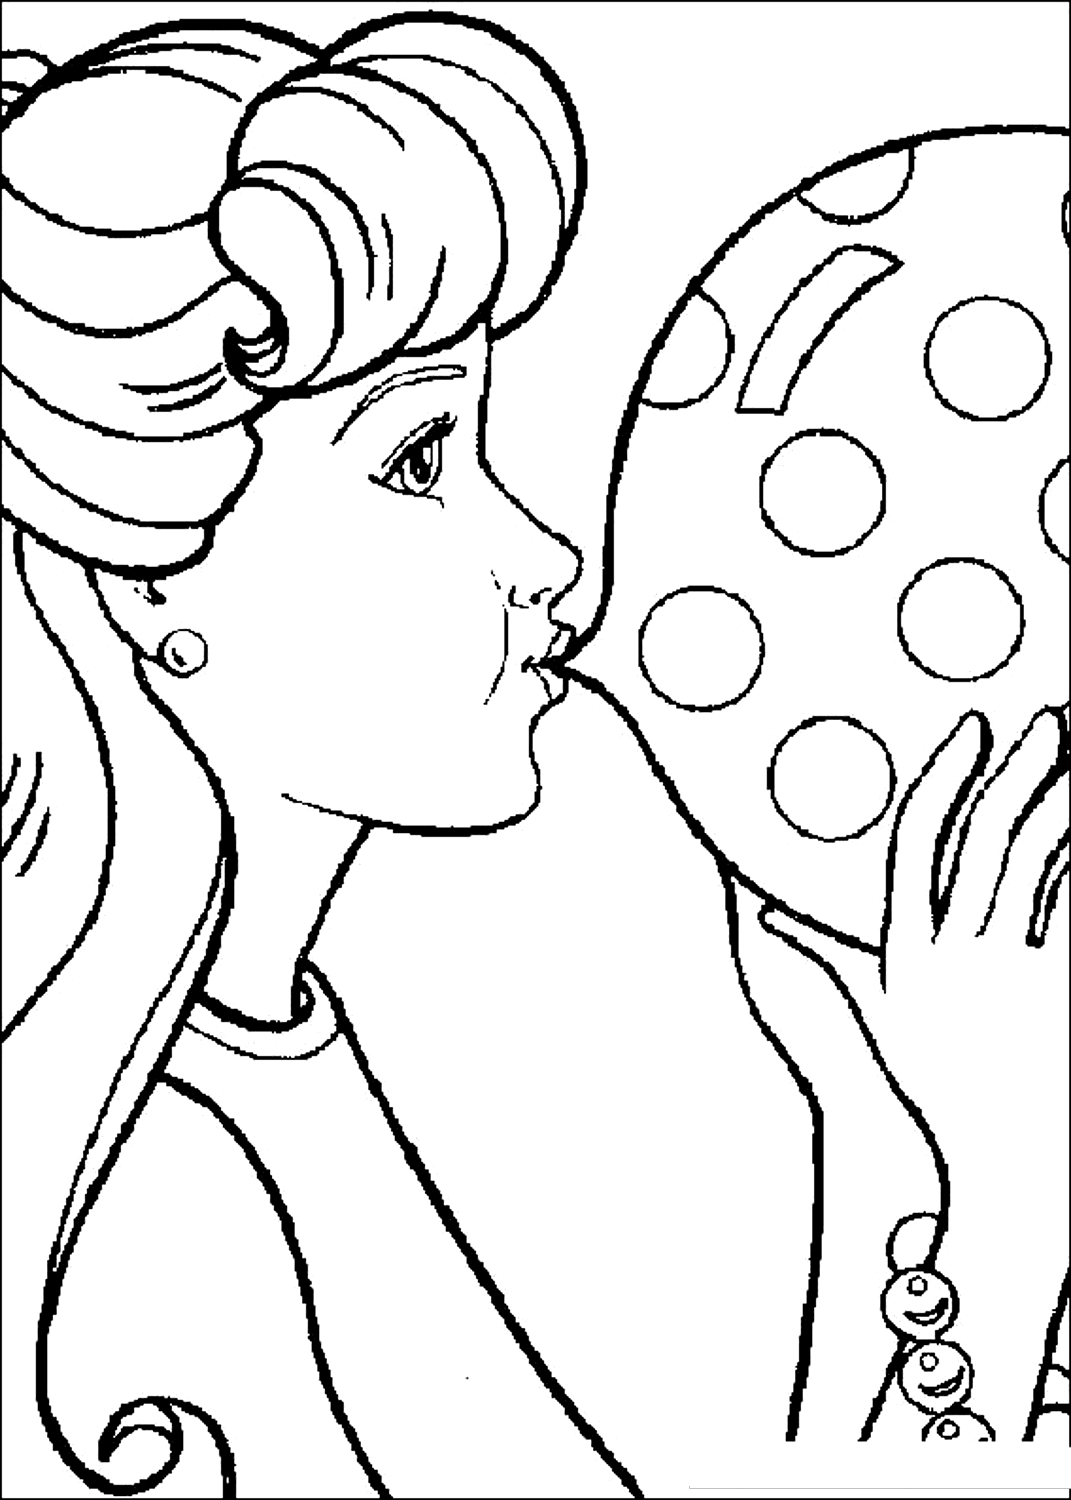 Drawing 06 from Barbie to print and coloring